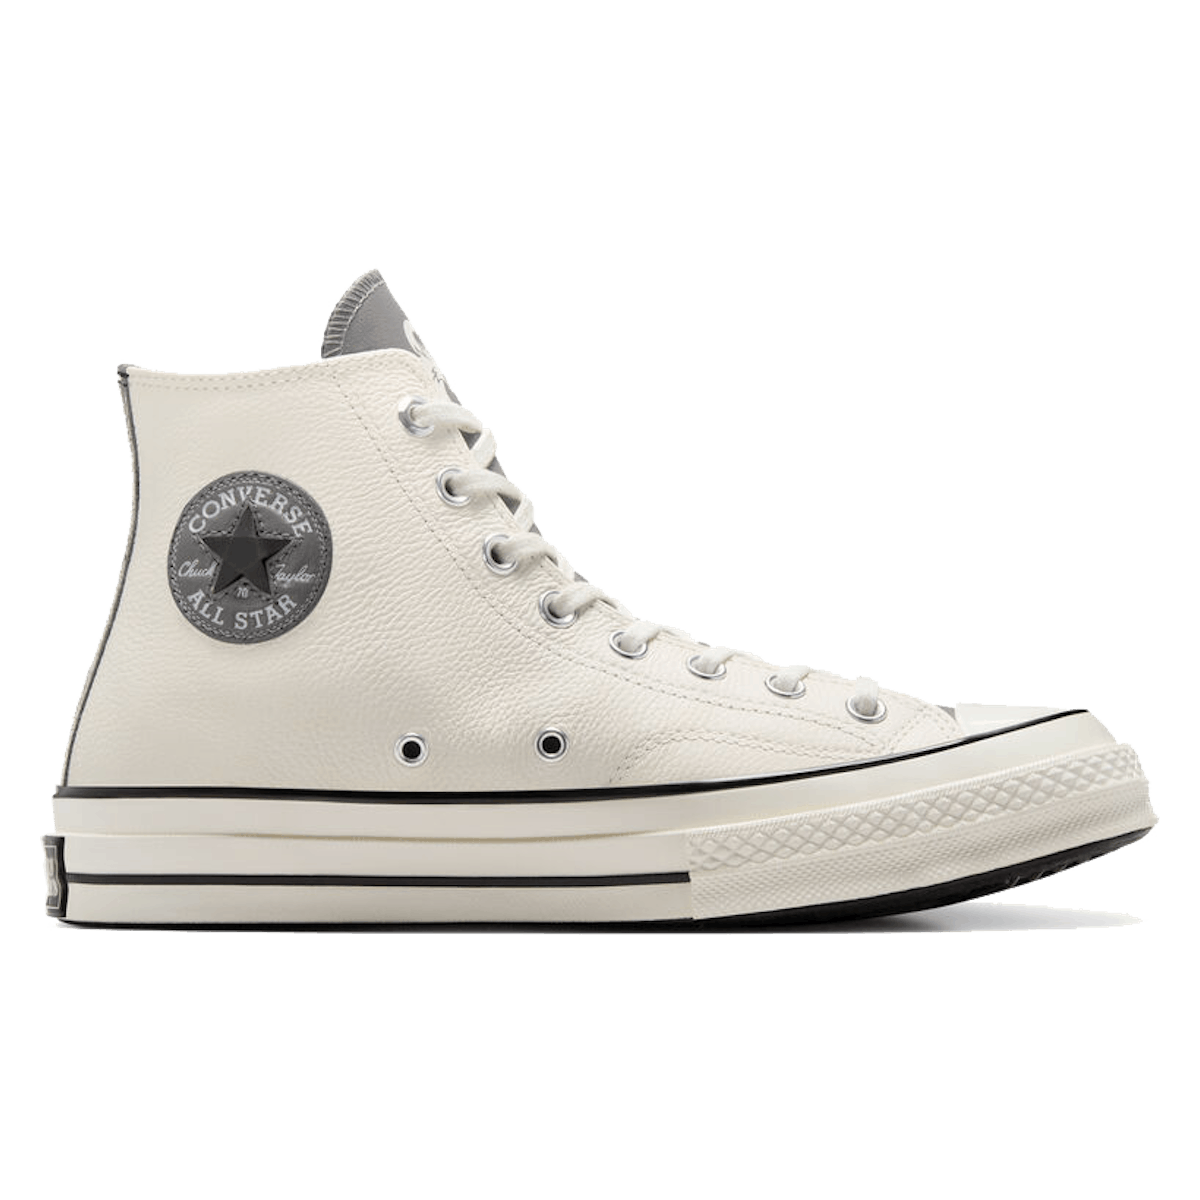 Dungeons & Dragons x Converse Chuck 70 Leather "Black / White"